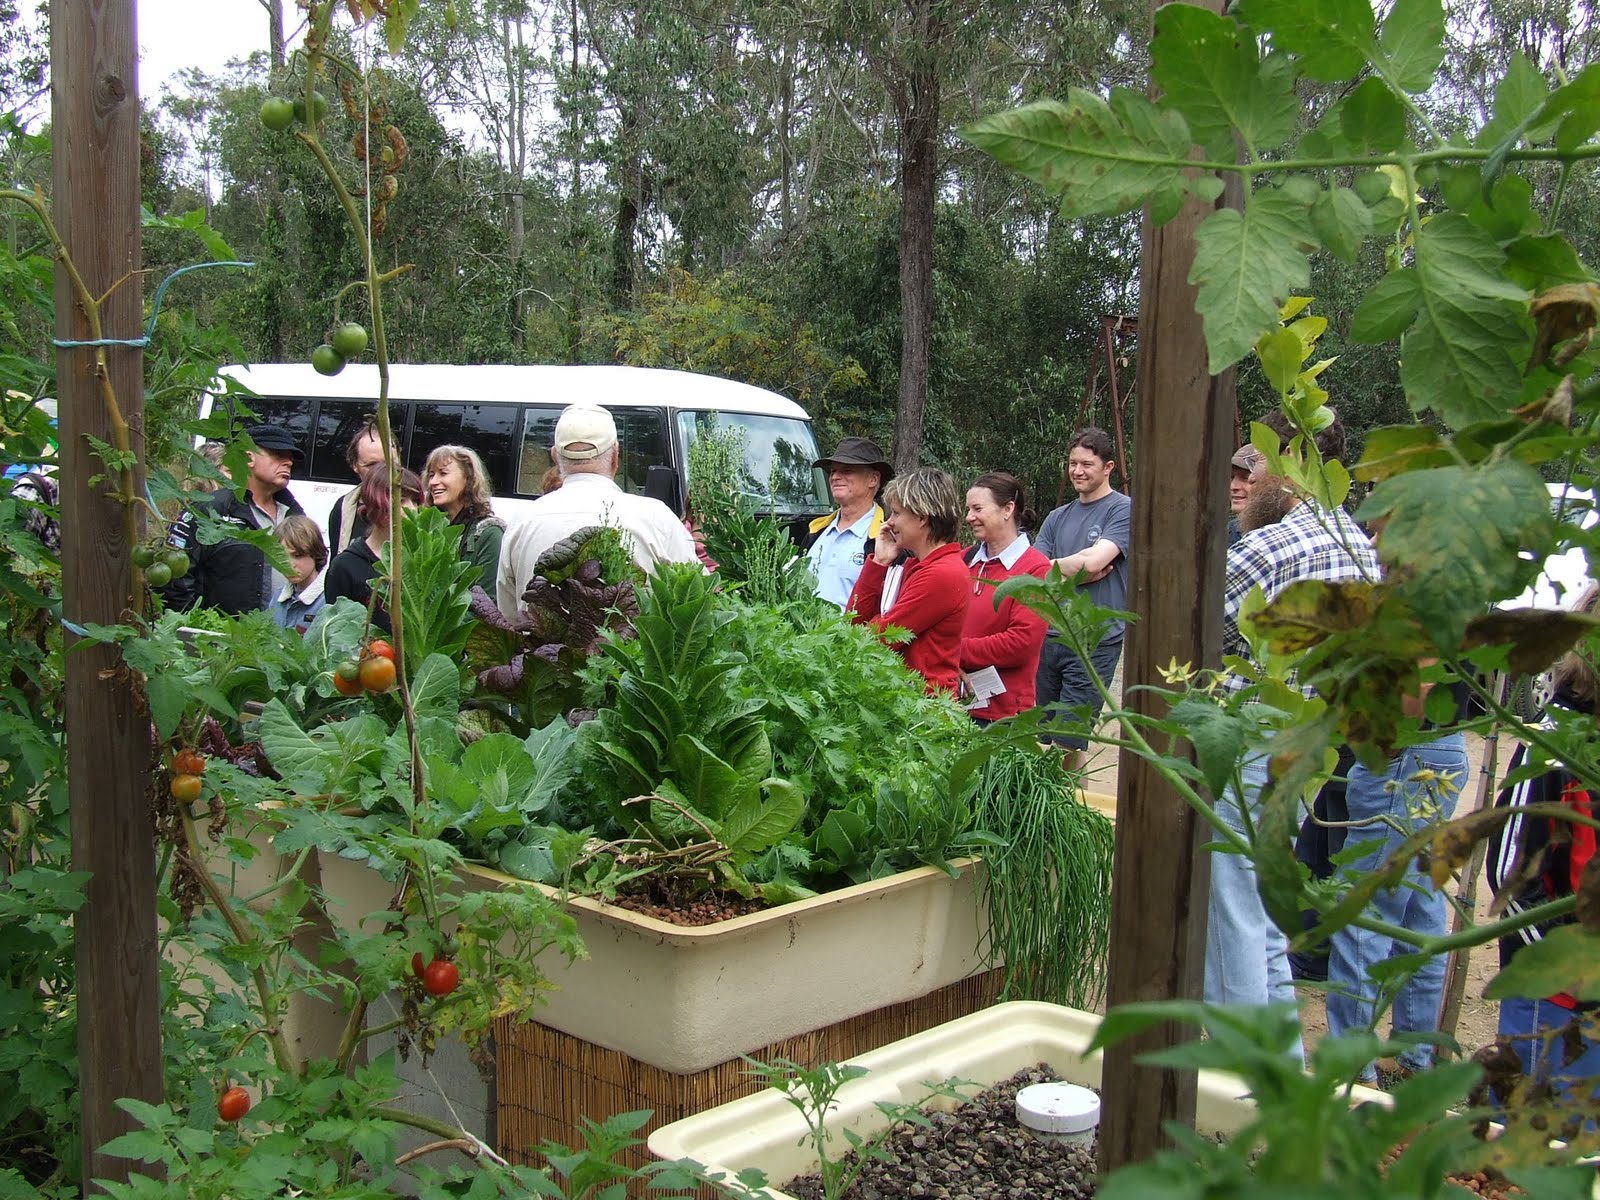 boonah organisation for a sustainable shire: aquaponics is the go !!